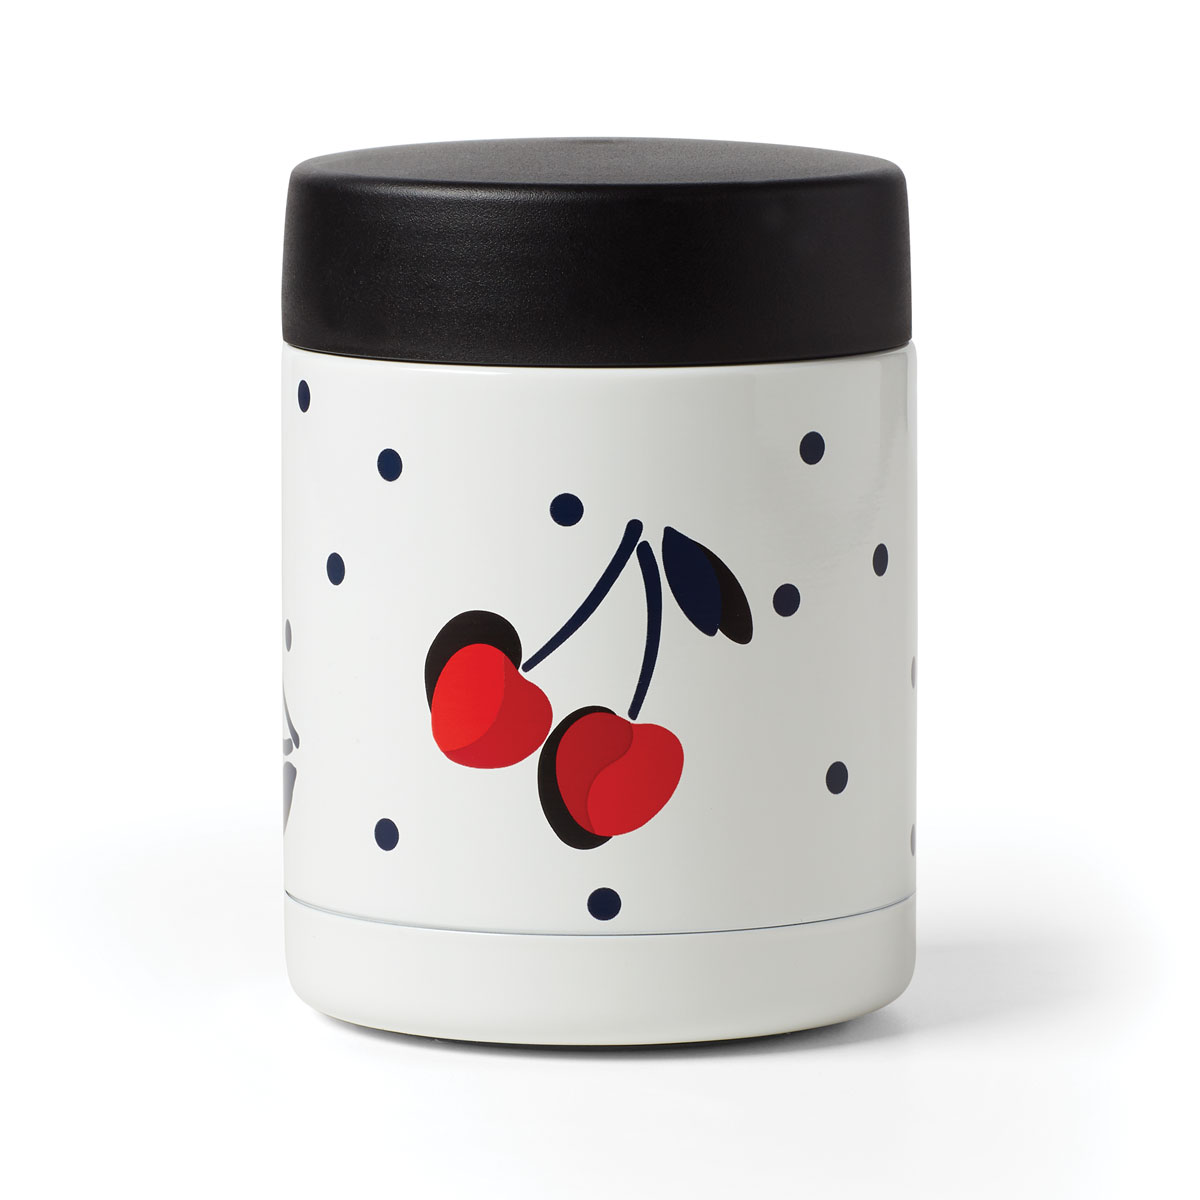 Kate Spade New York, Lenox Vintage Cherry Dot Insulate Food Container